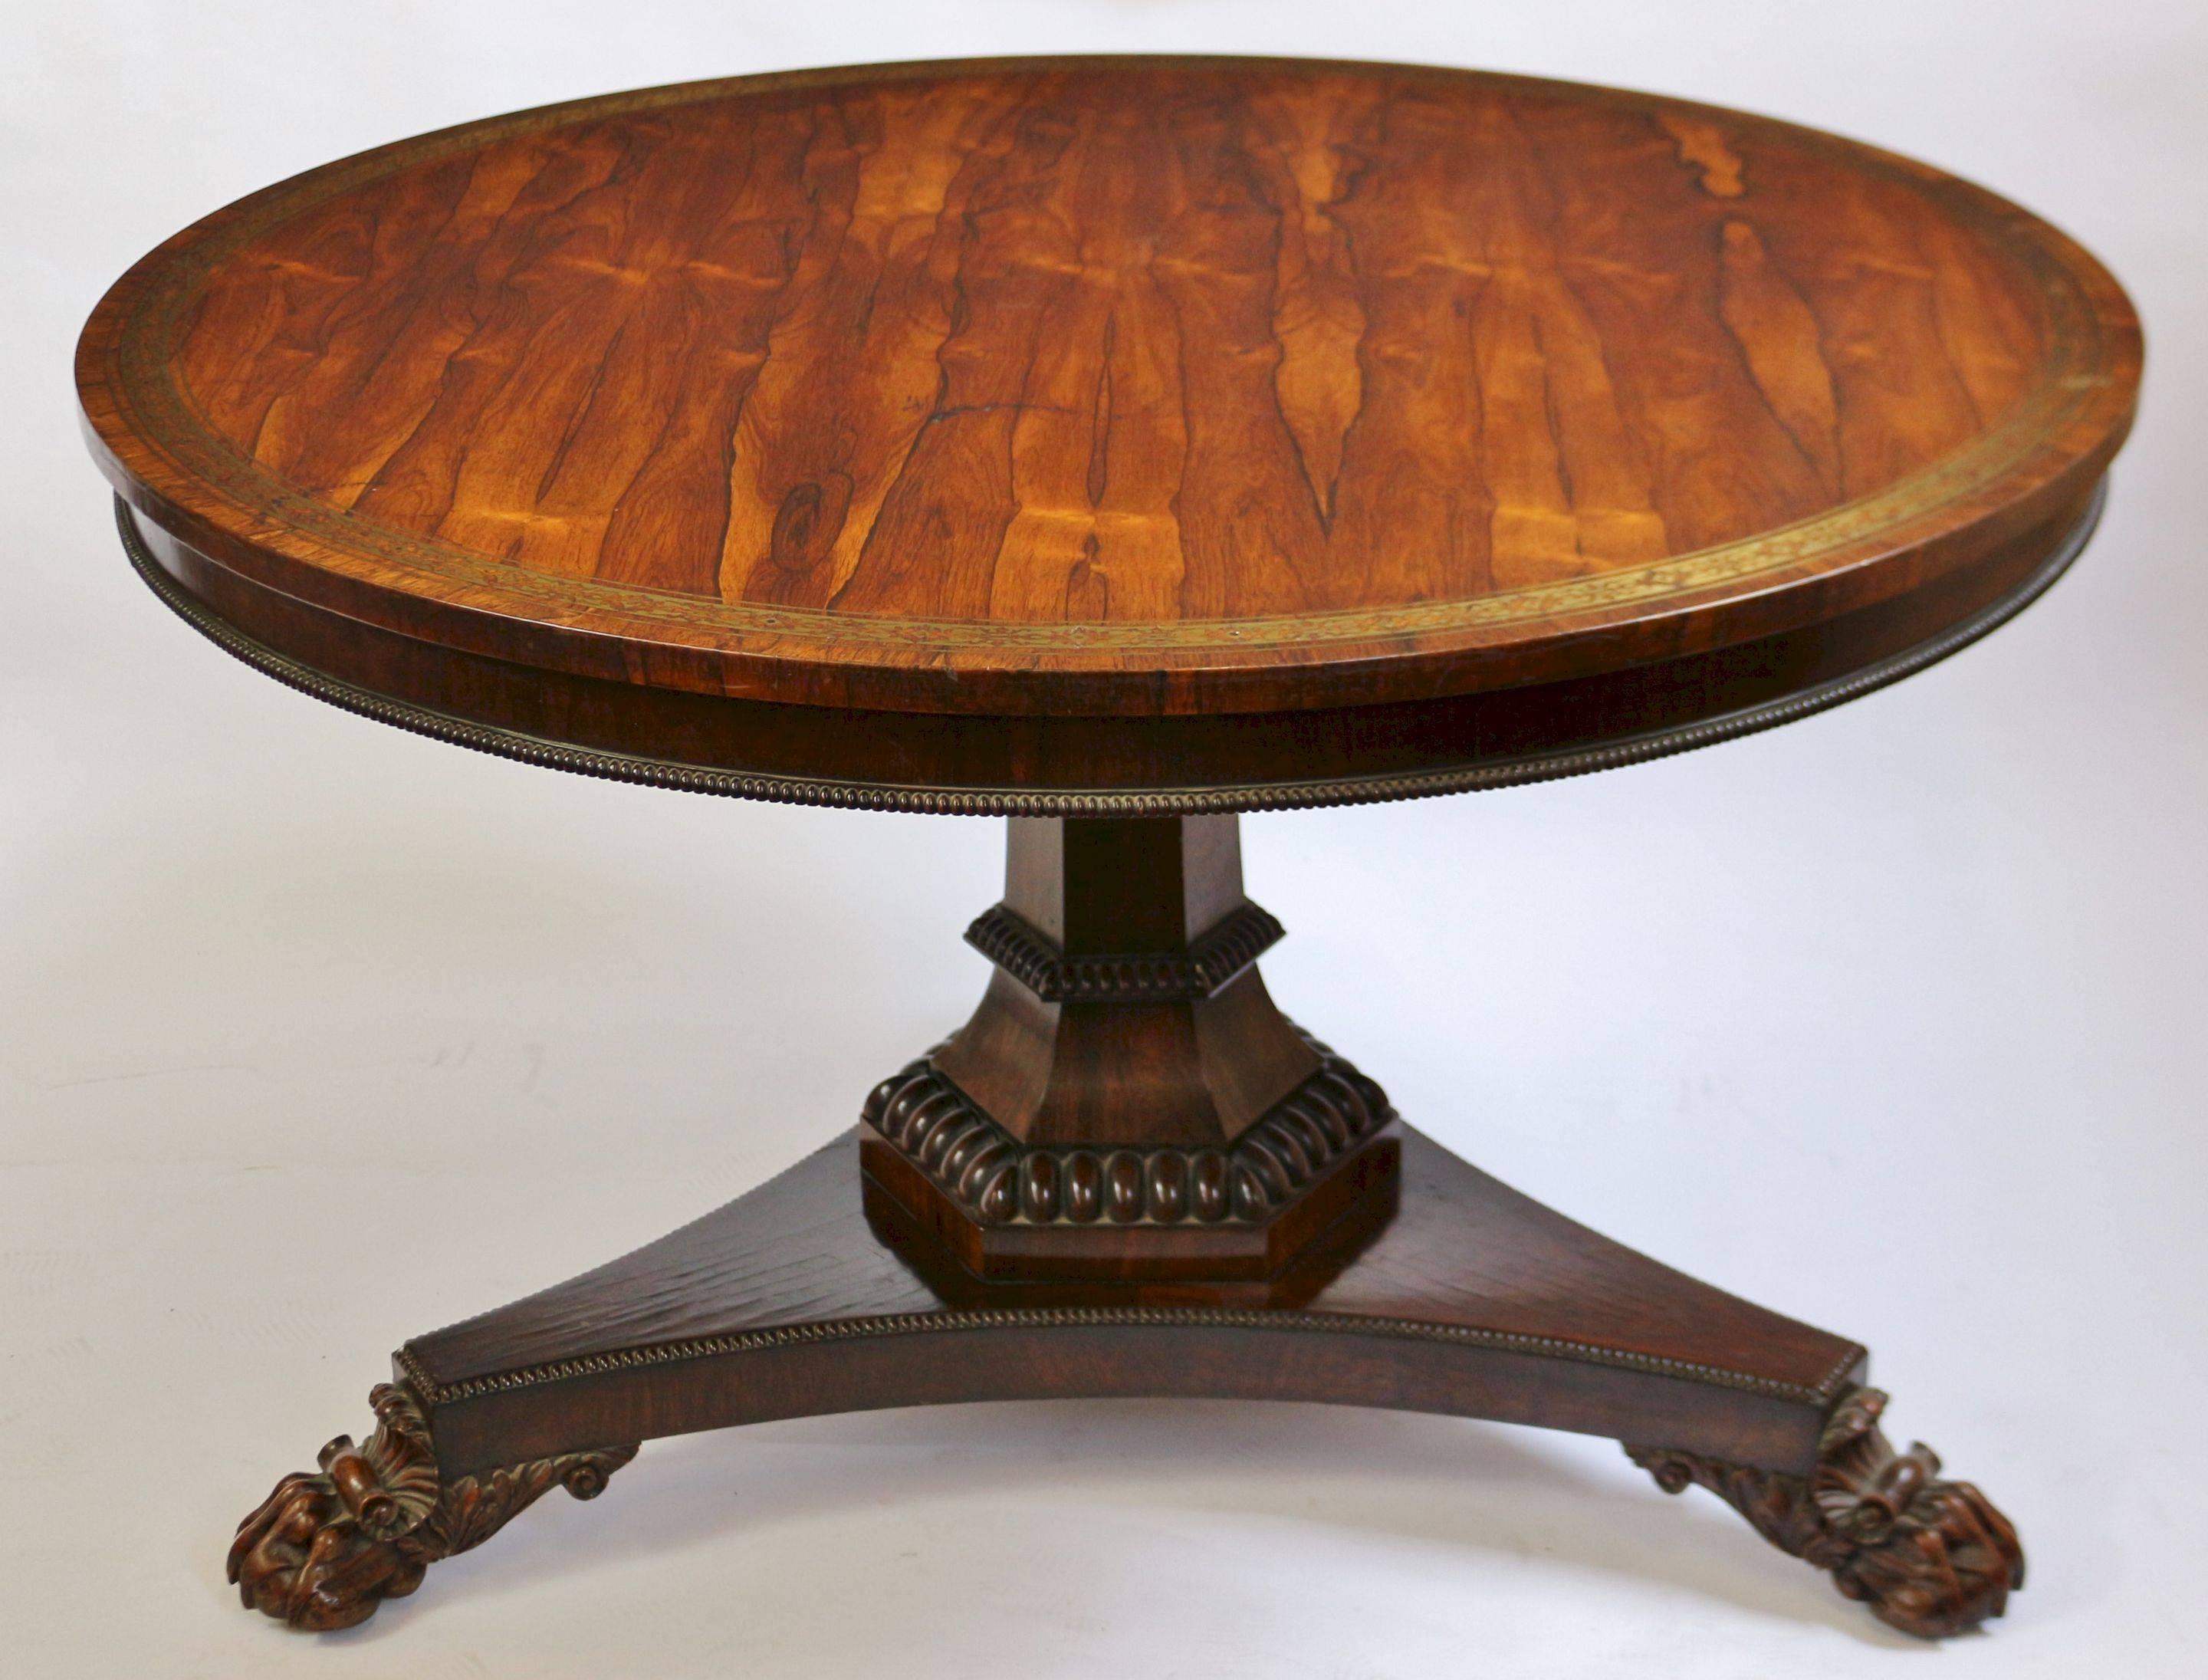 Early 19th Century Fine and Classic Regency Rosewood Pedestal Table